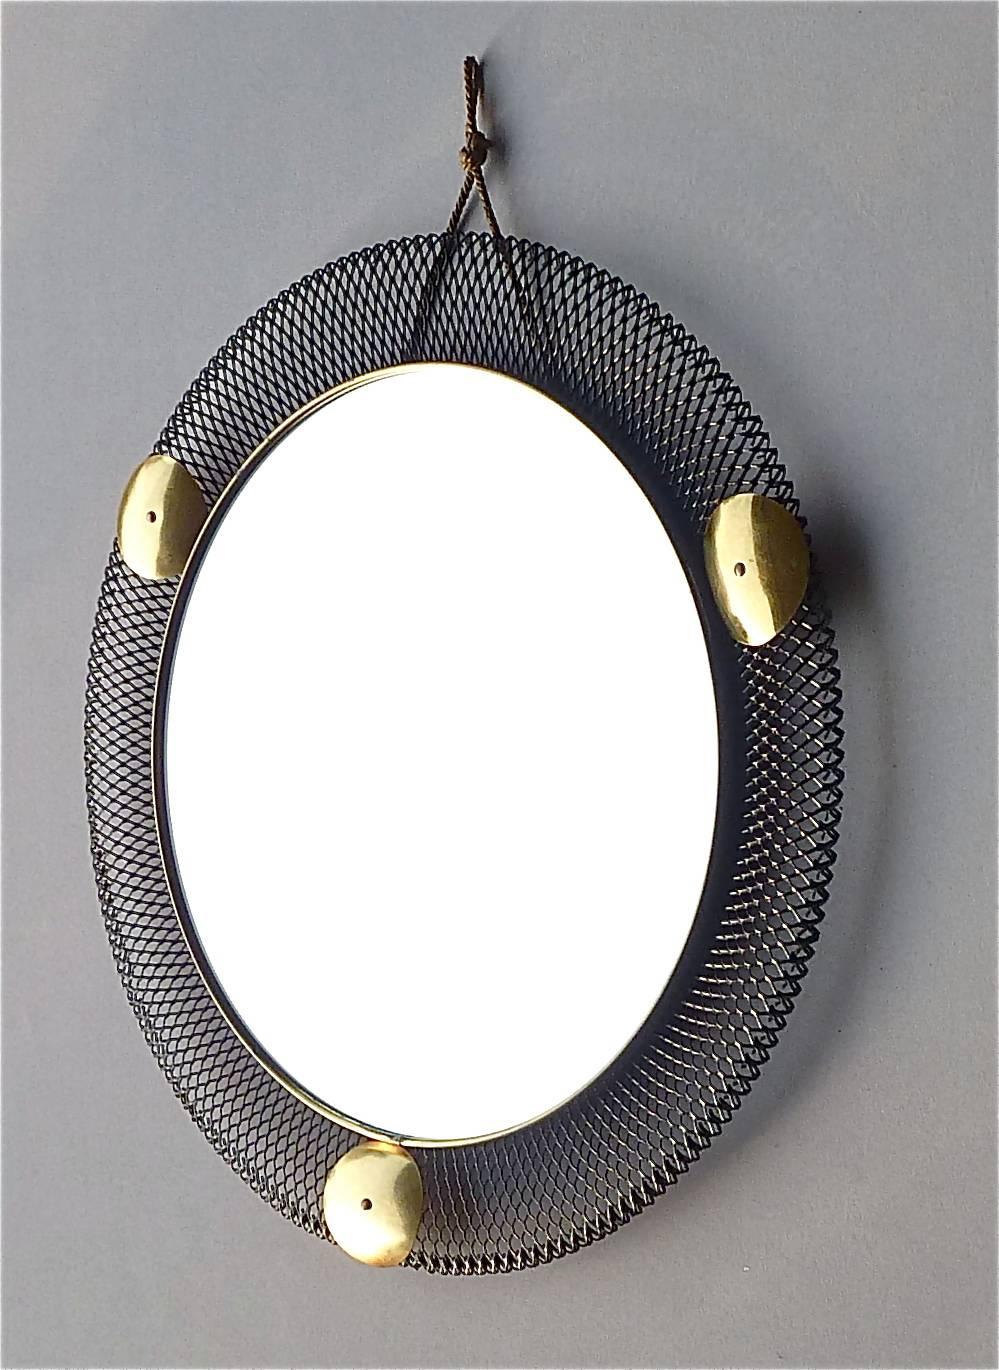 Round midcentury wall mirror which is made in the style of Jacques Biny, Mategot or Pierre Guariche, France or Italy, circa 1955. It is made of black lacquered or enameled stretched metal, lovely patinated brass details, mirror glass and its